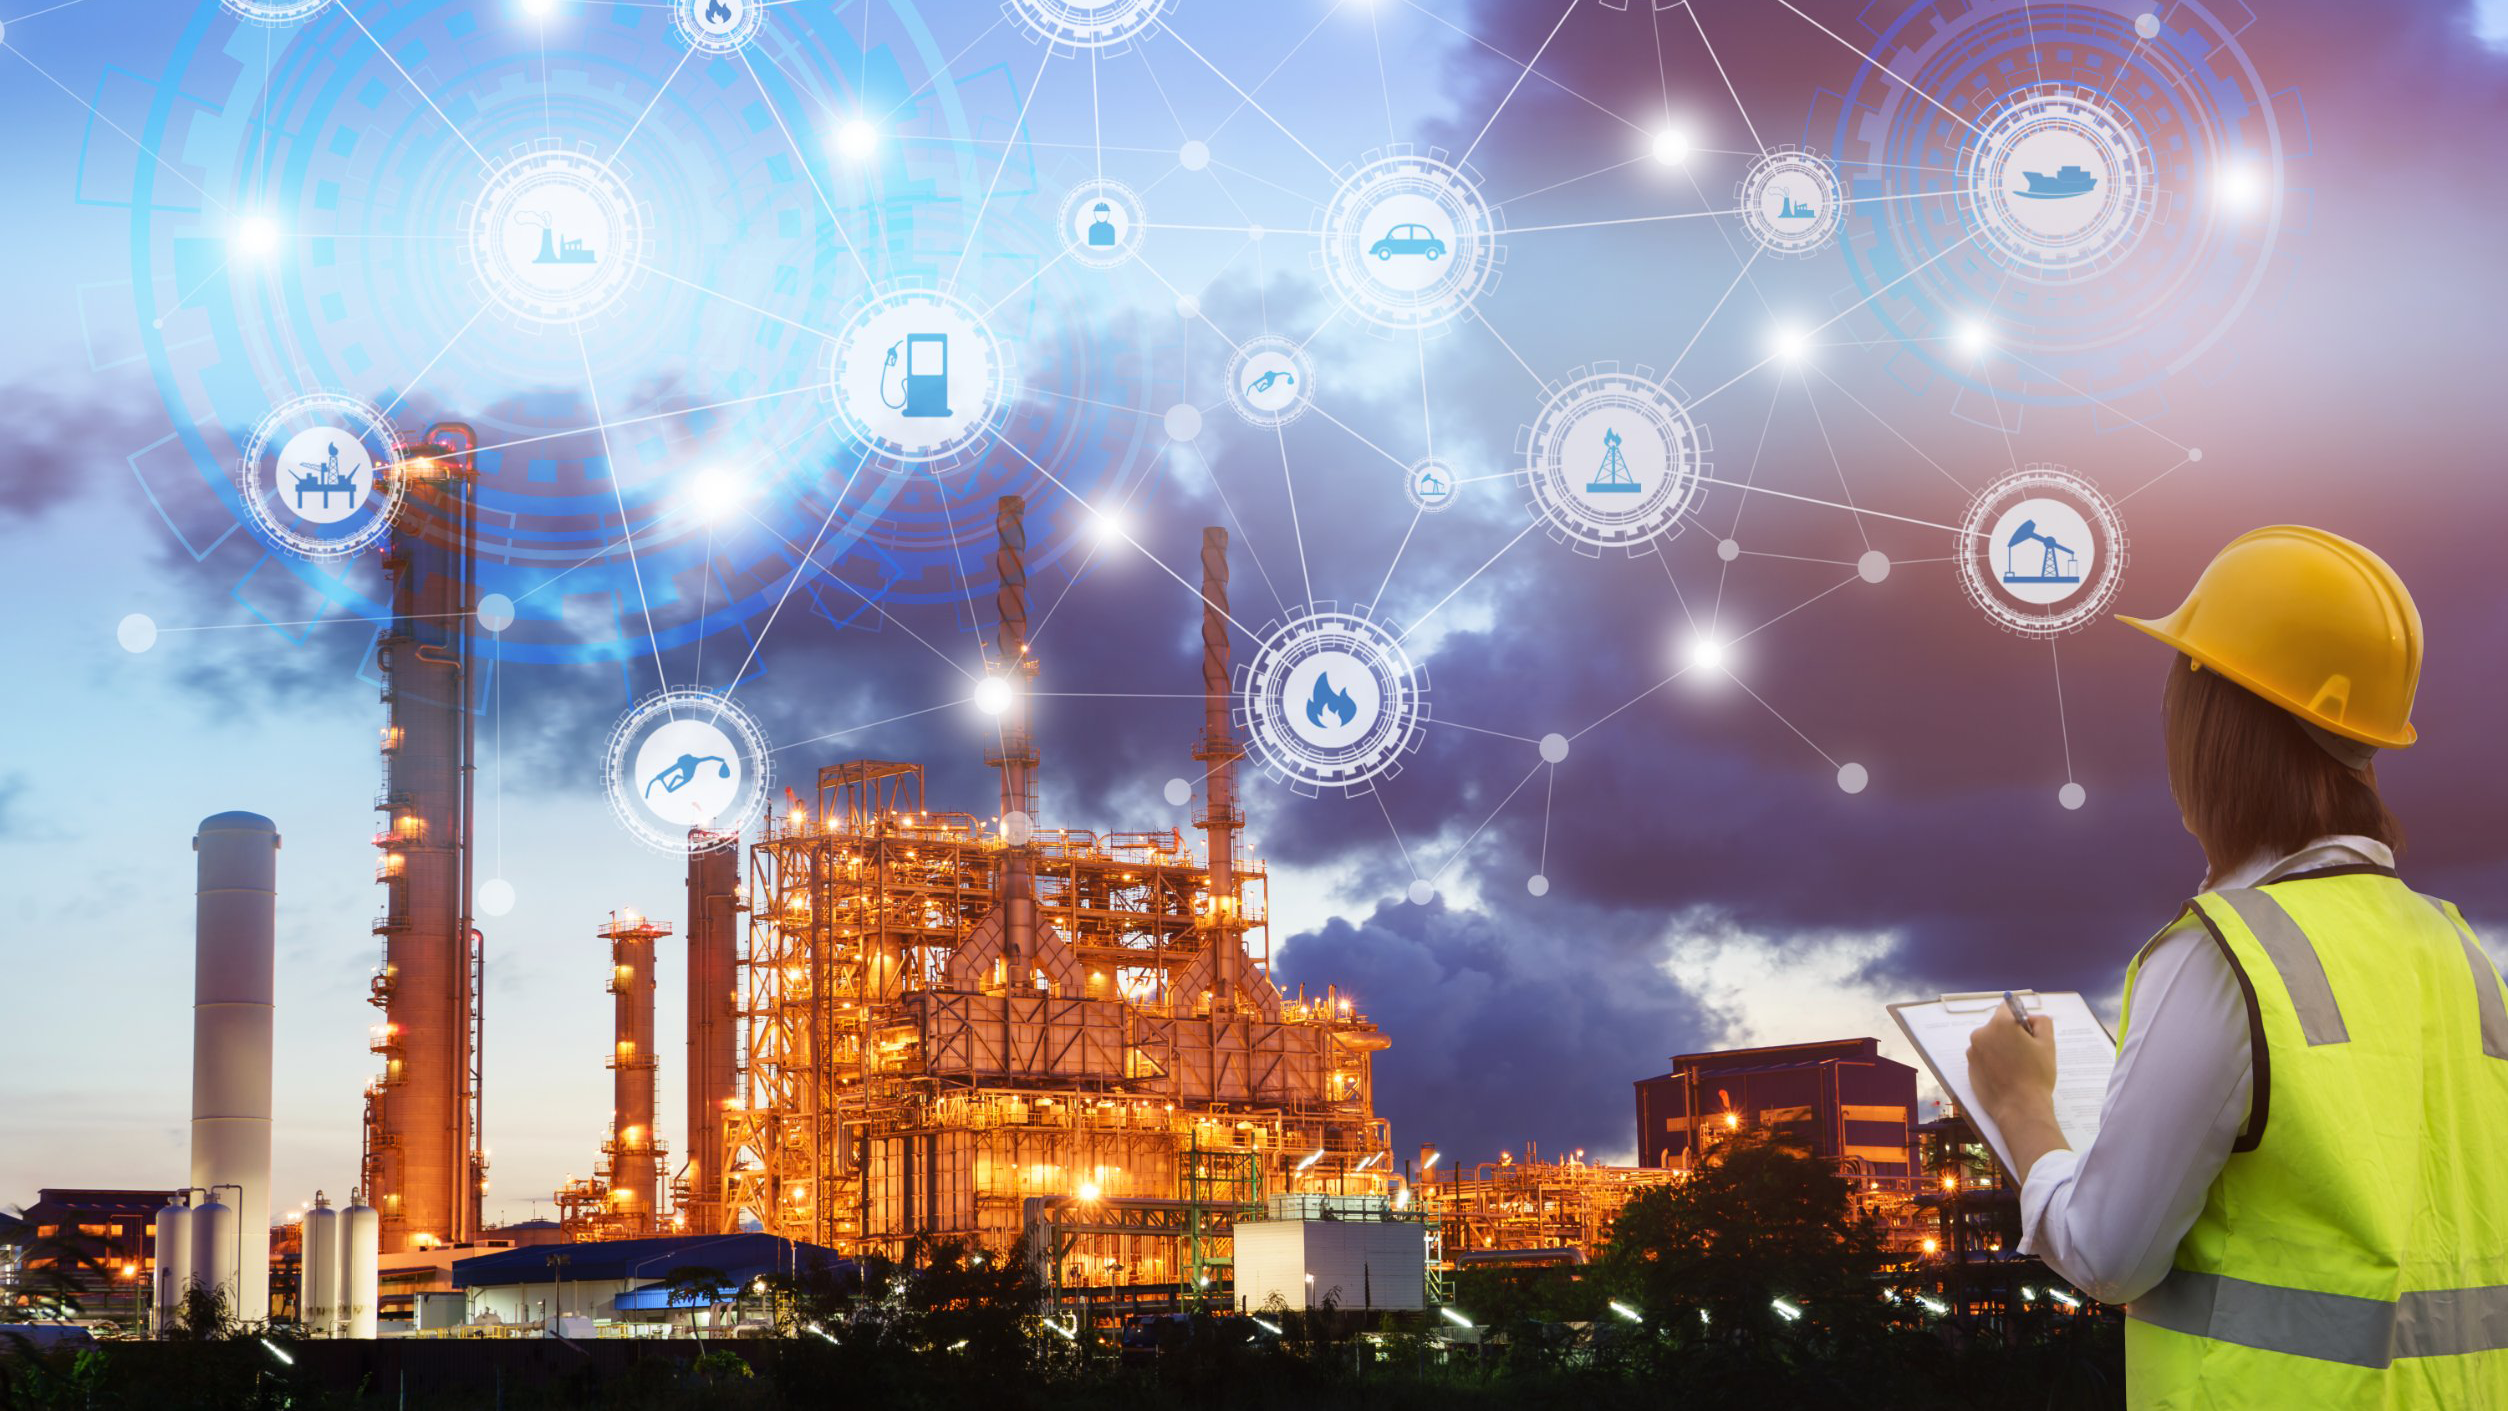 Engineering industry 4.0 concept using clipboard with check and industrial icons on sunset background of refinery industry.